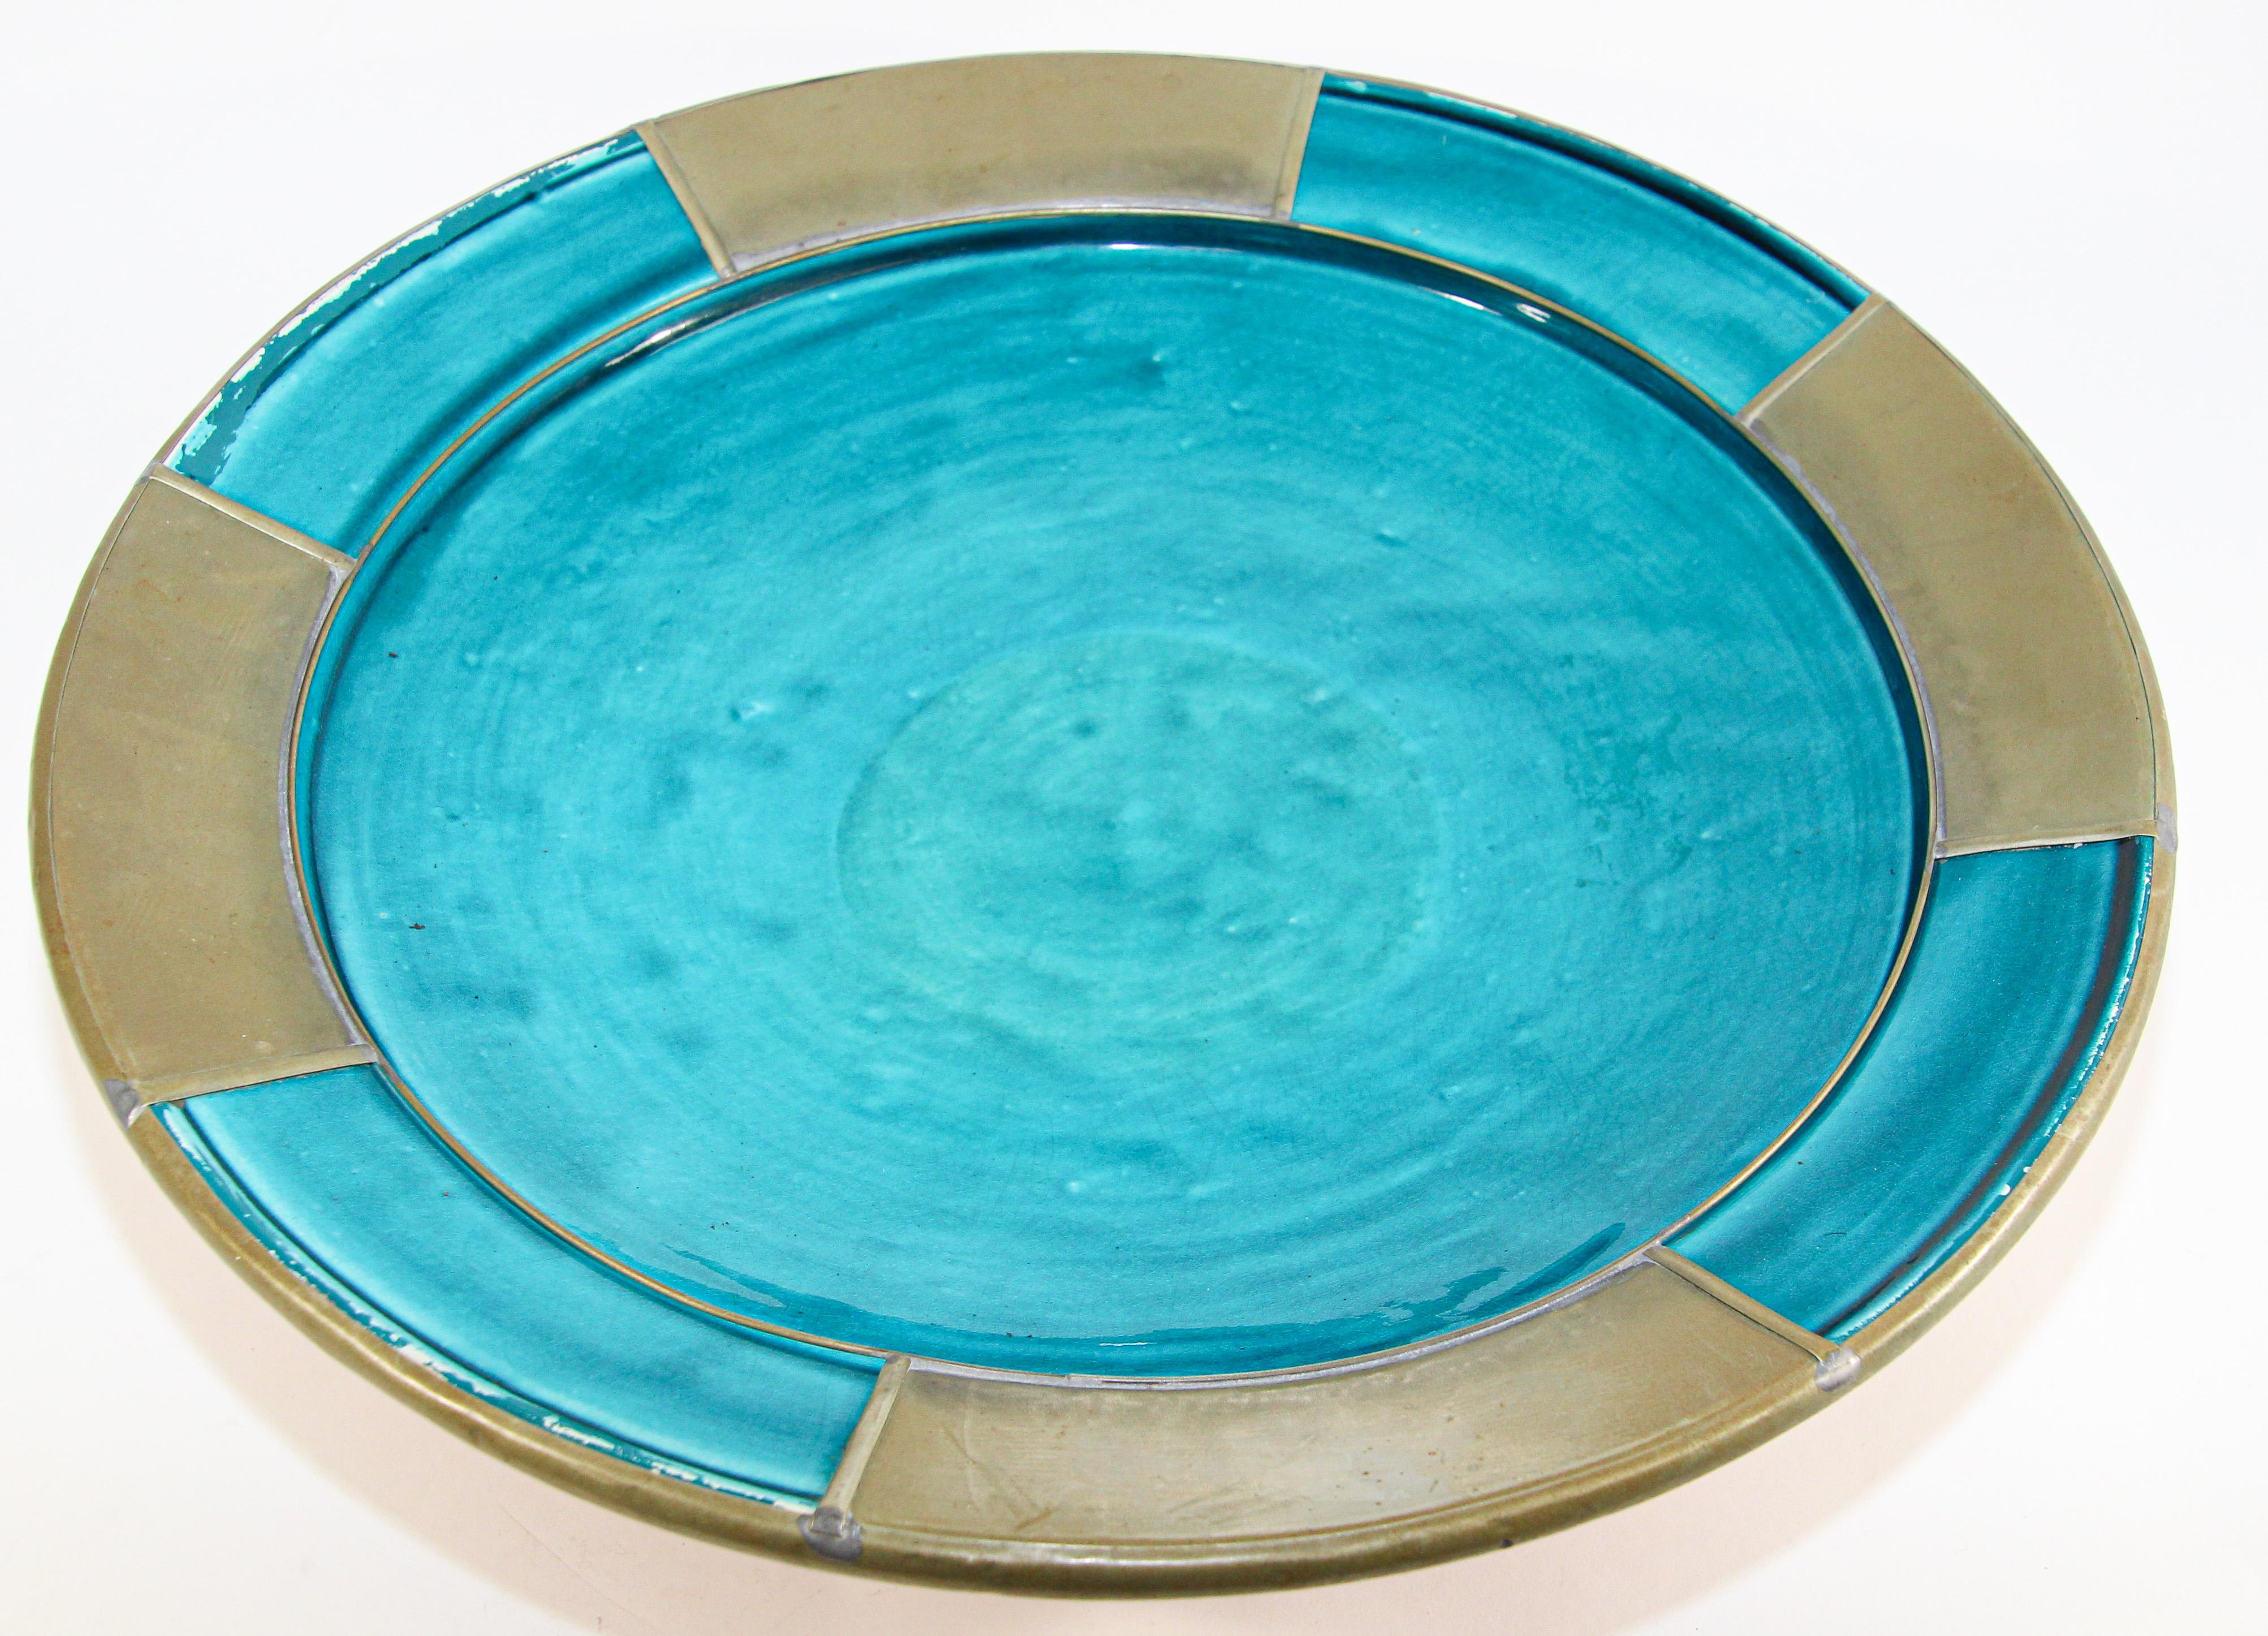 Moroccan handcrafted ceramic turquoise blue bowl decorated with overlaid metal.
Moorish style hand made platter from Safi Morocco.
Could be hanging on the wall or used as a decorative platter.
Size: 15